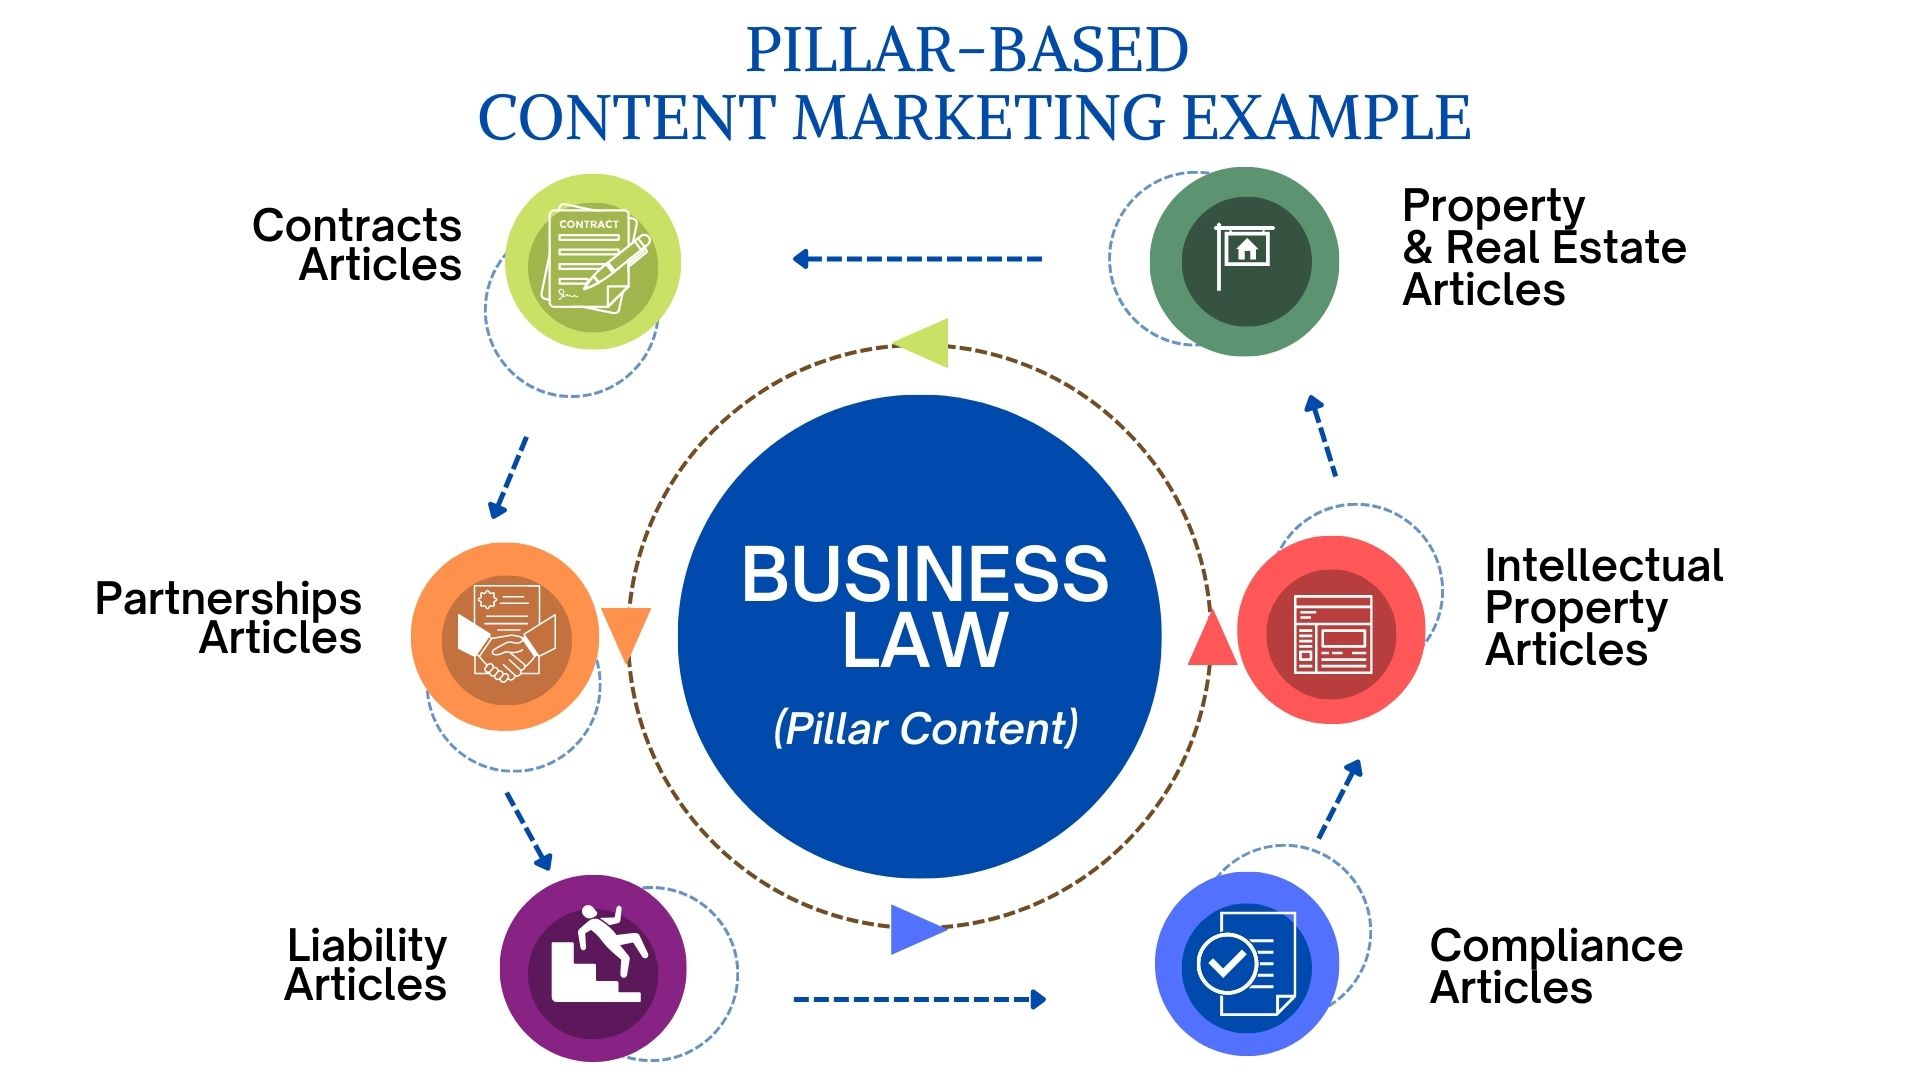 Jemully Media law firm pillar-based content marketing example